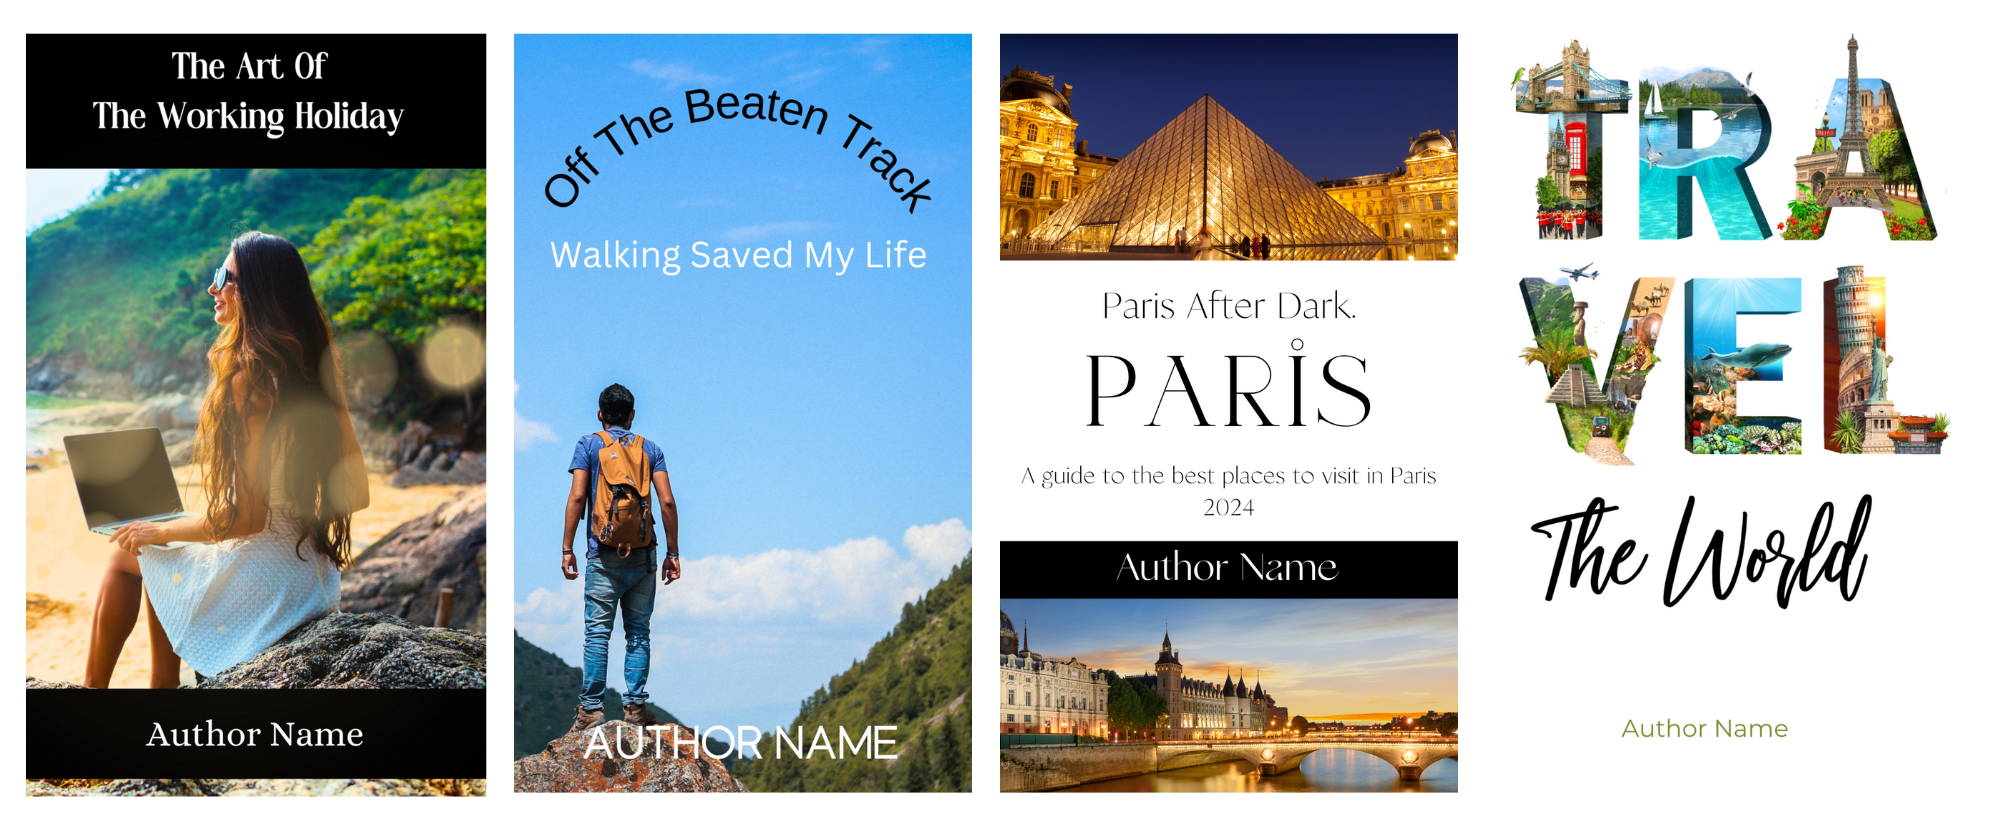 A collage of five book cover images related to travel. Titles include "The Art Of The Working Holiday," "Off The Beaten Track," "Paris After Dark," and "Travel The World." Each cover features travel-themed images such as a woman on a beach, a hiker, the Eiffel Tower, and scenic landscapes. BookSelf Book Cover Design & Premade Book Covers